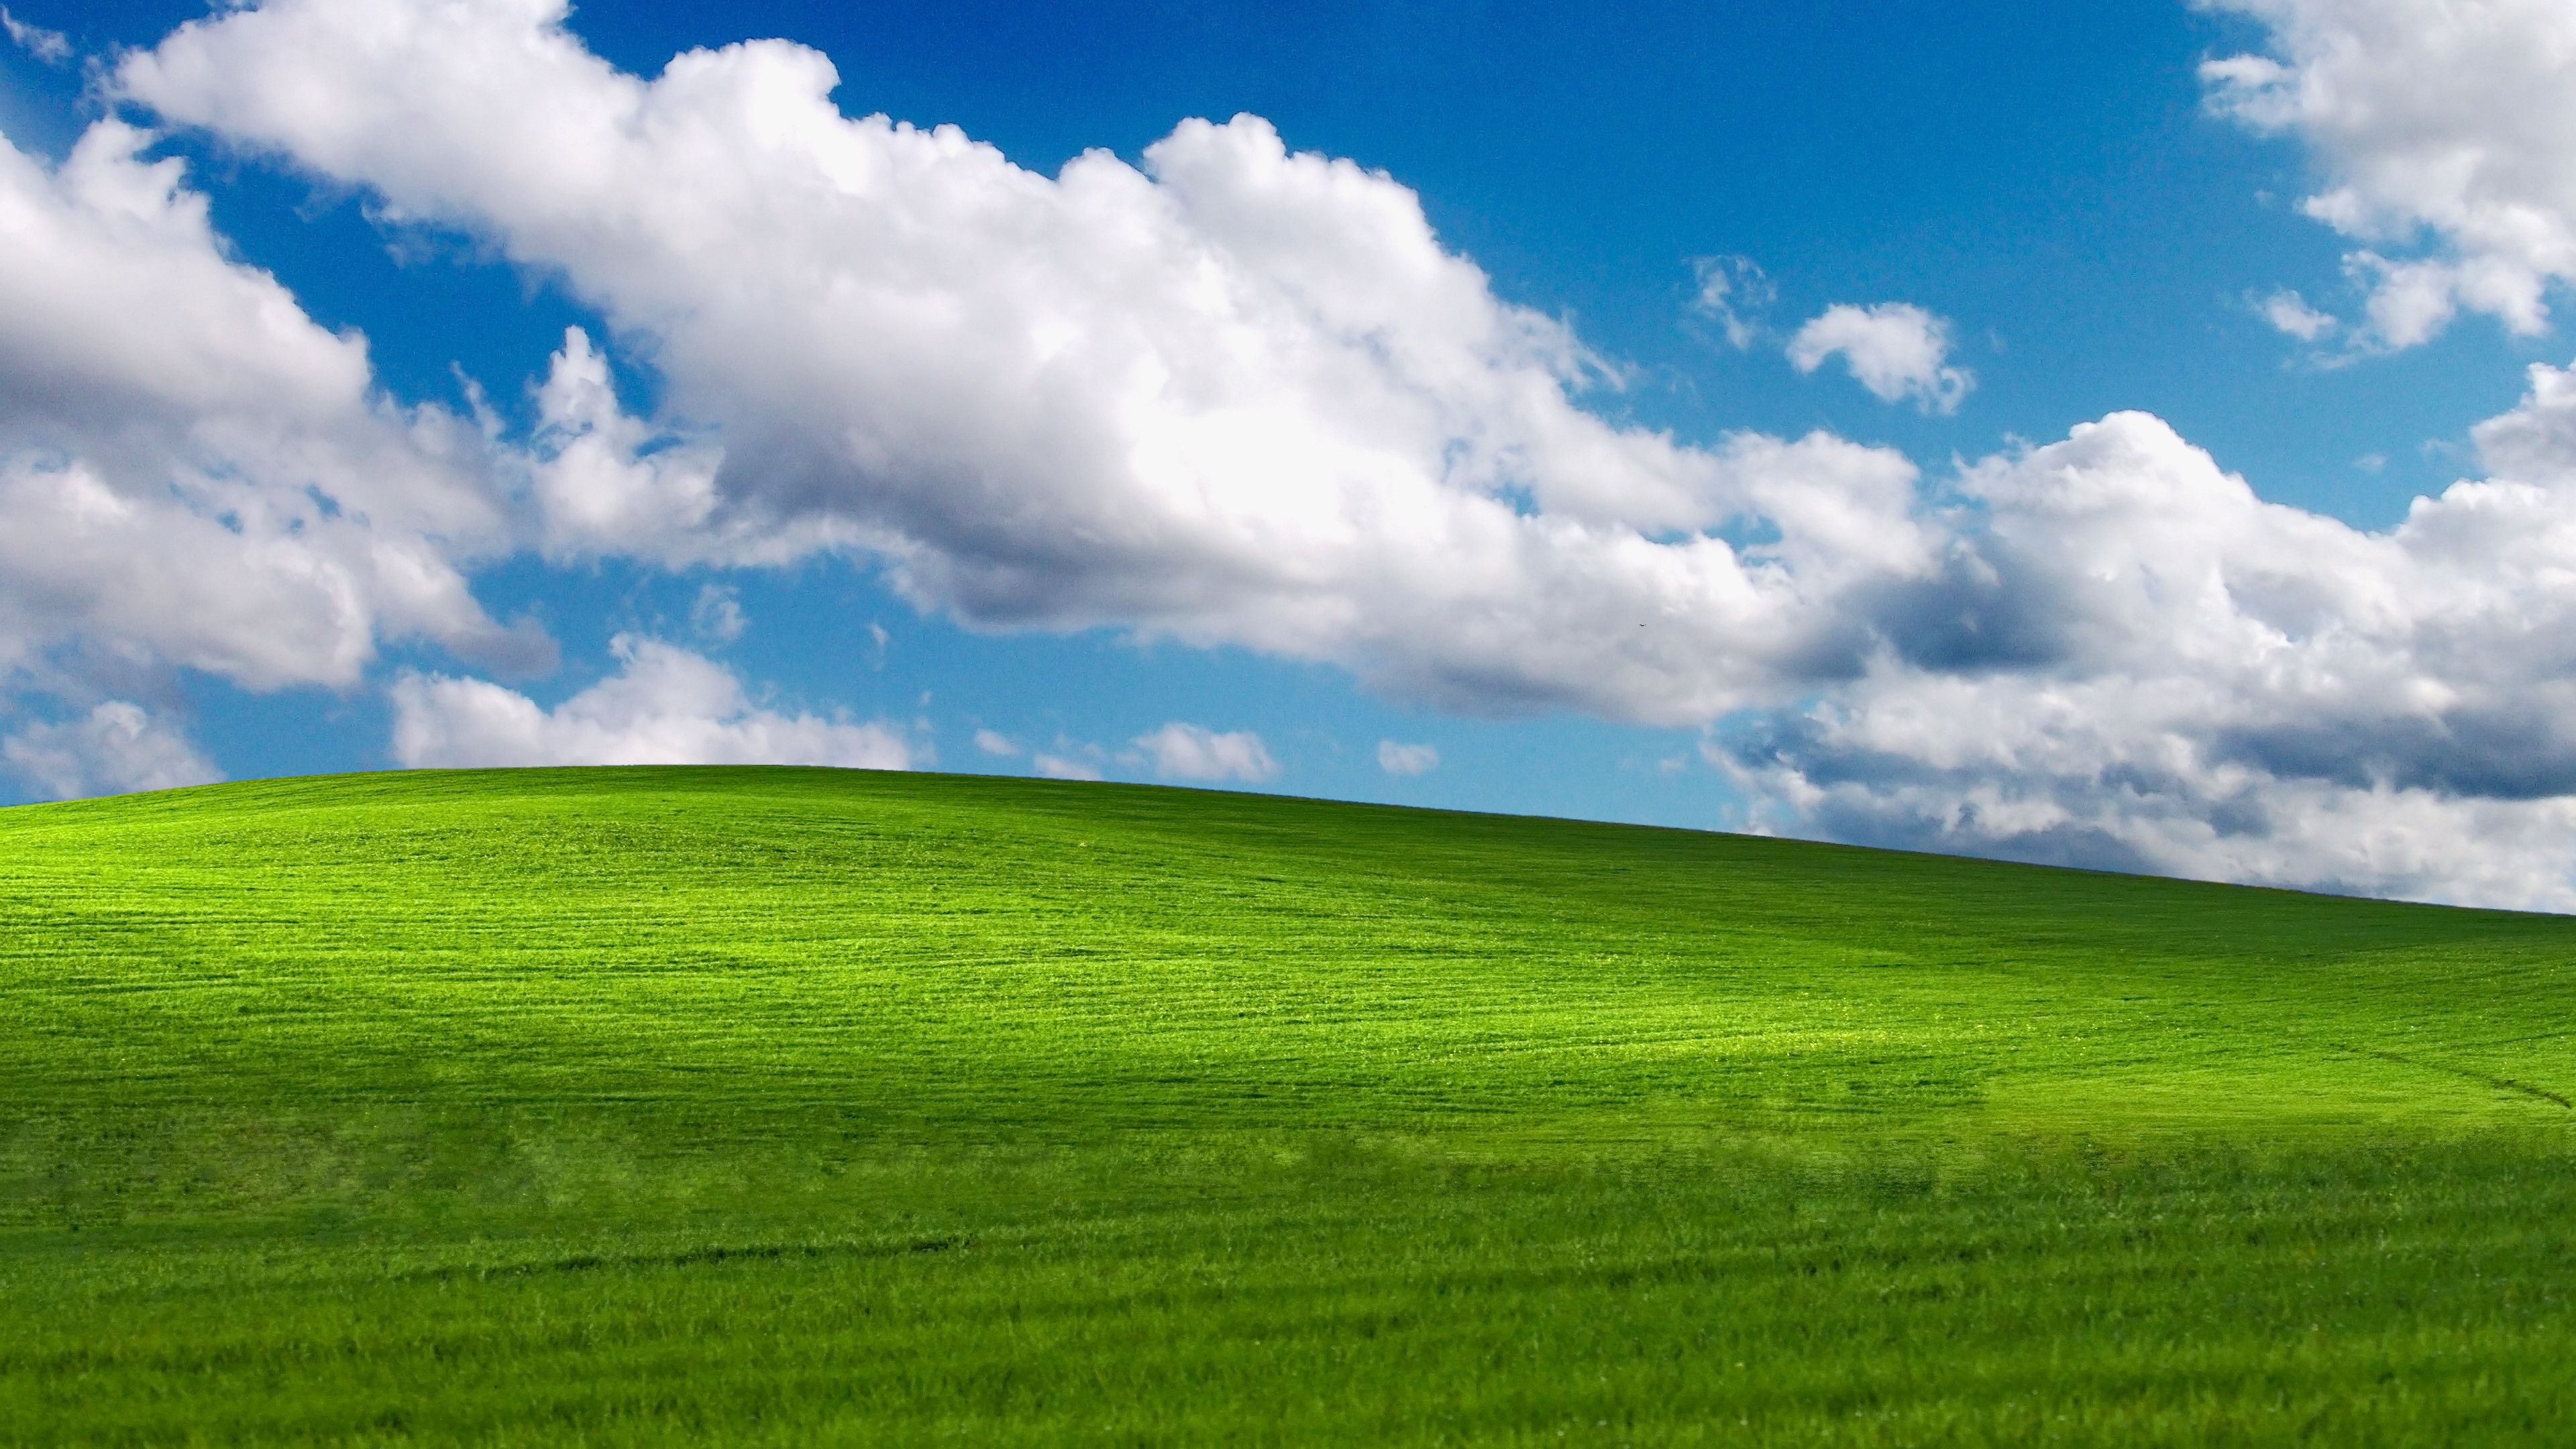 Windows XP desktop backgrounds  Free Download Borrow and Streaming   Internet Archive